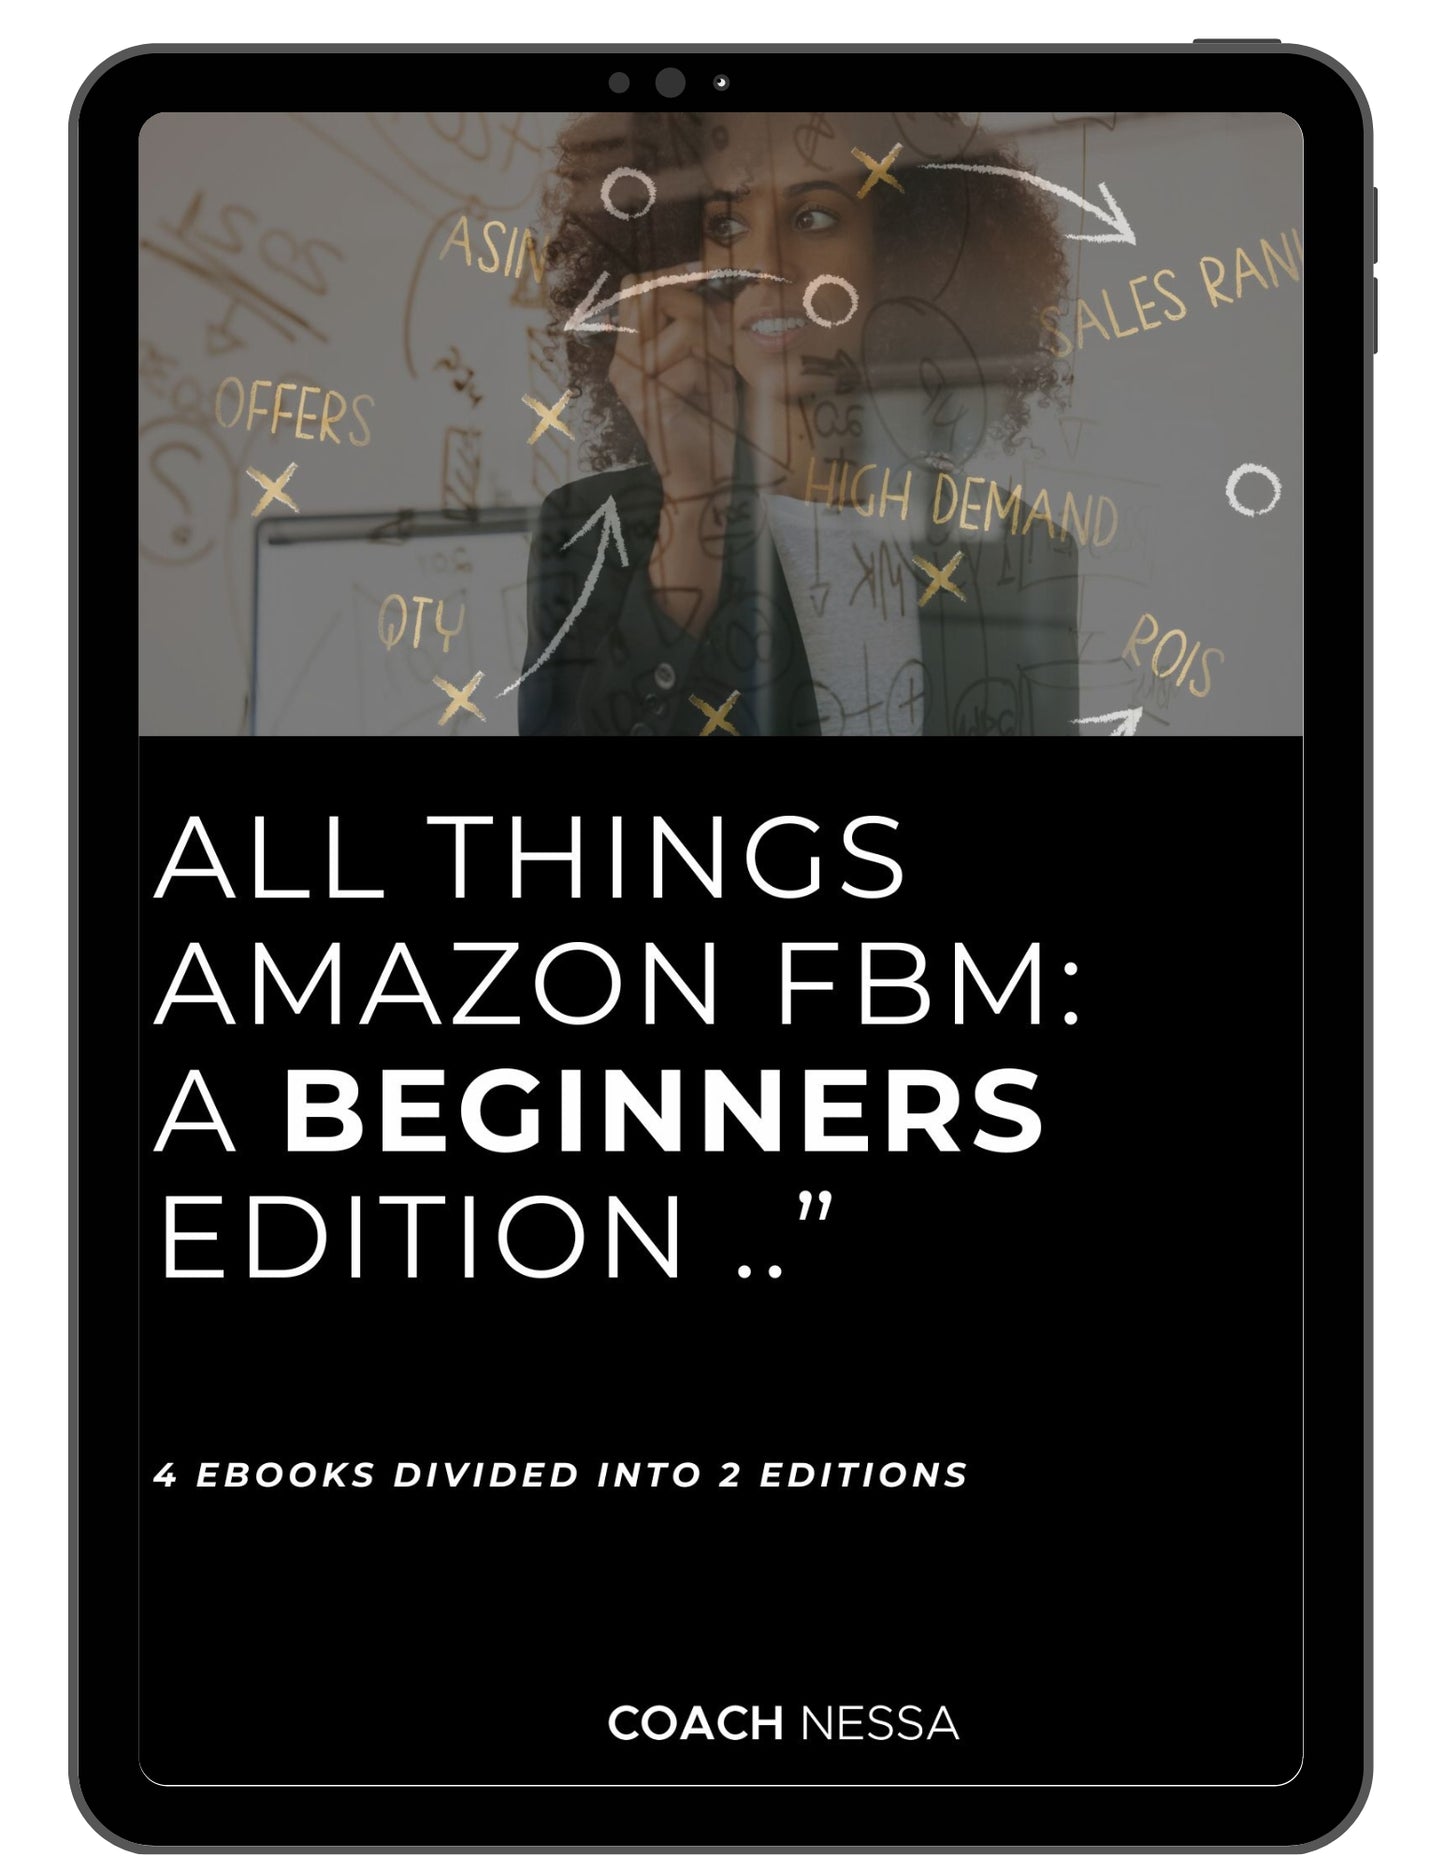 "All Things Amazon FBM: A Beginners Edition ..”